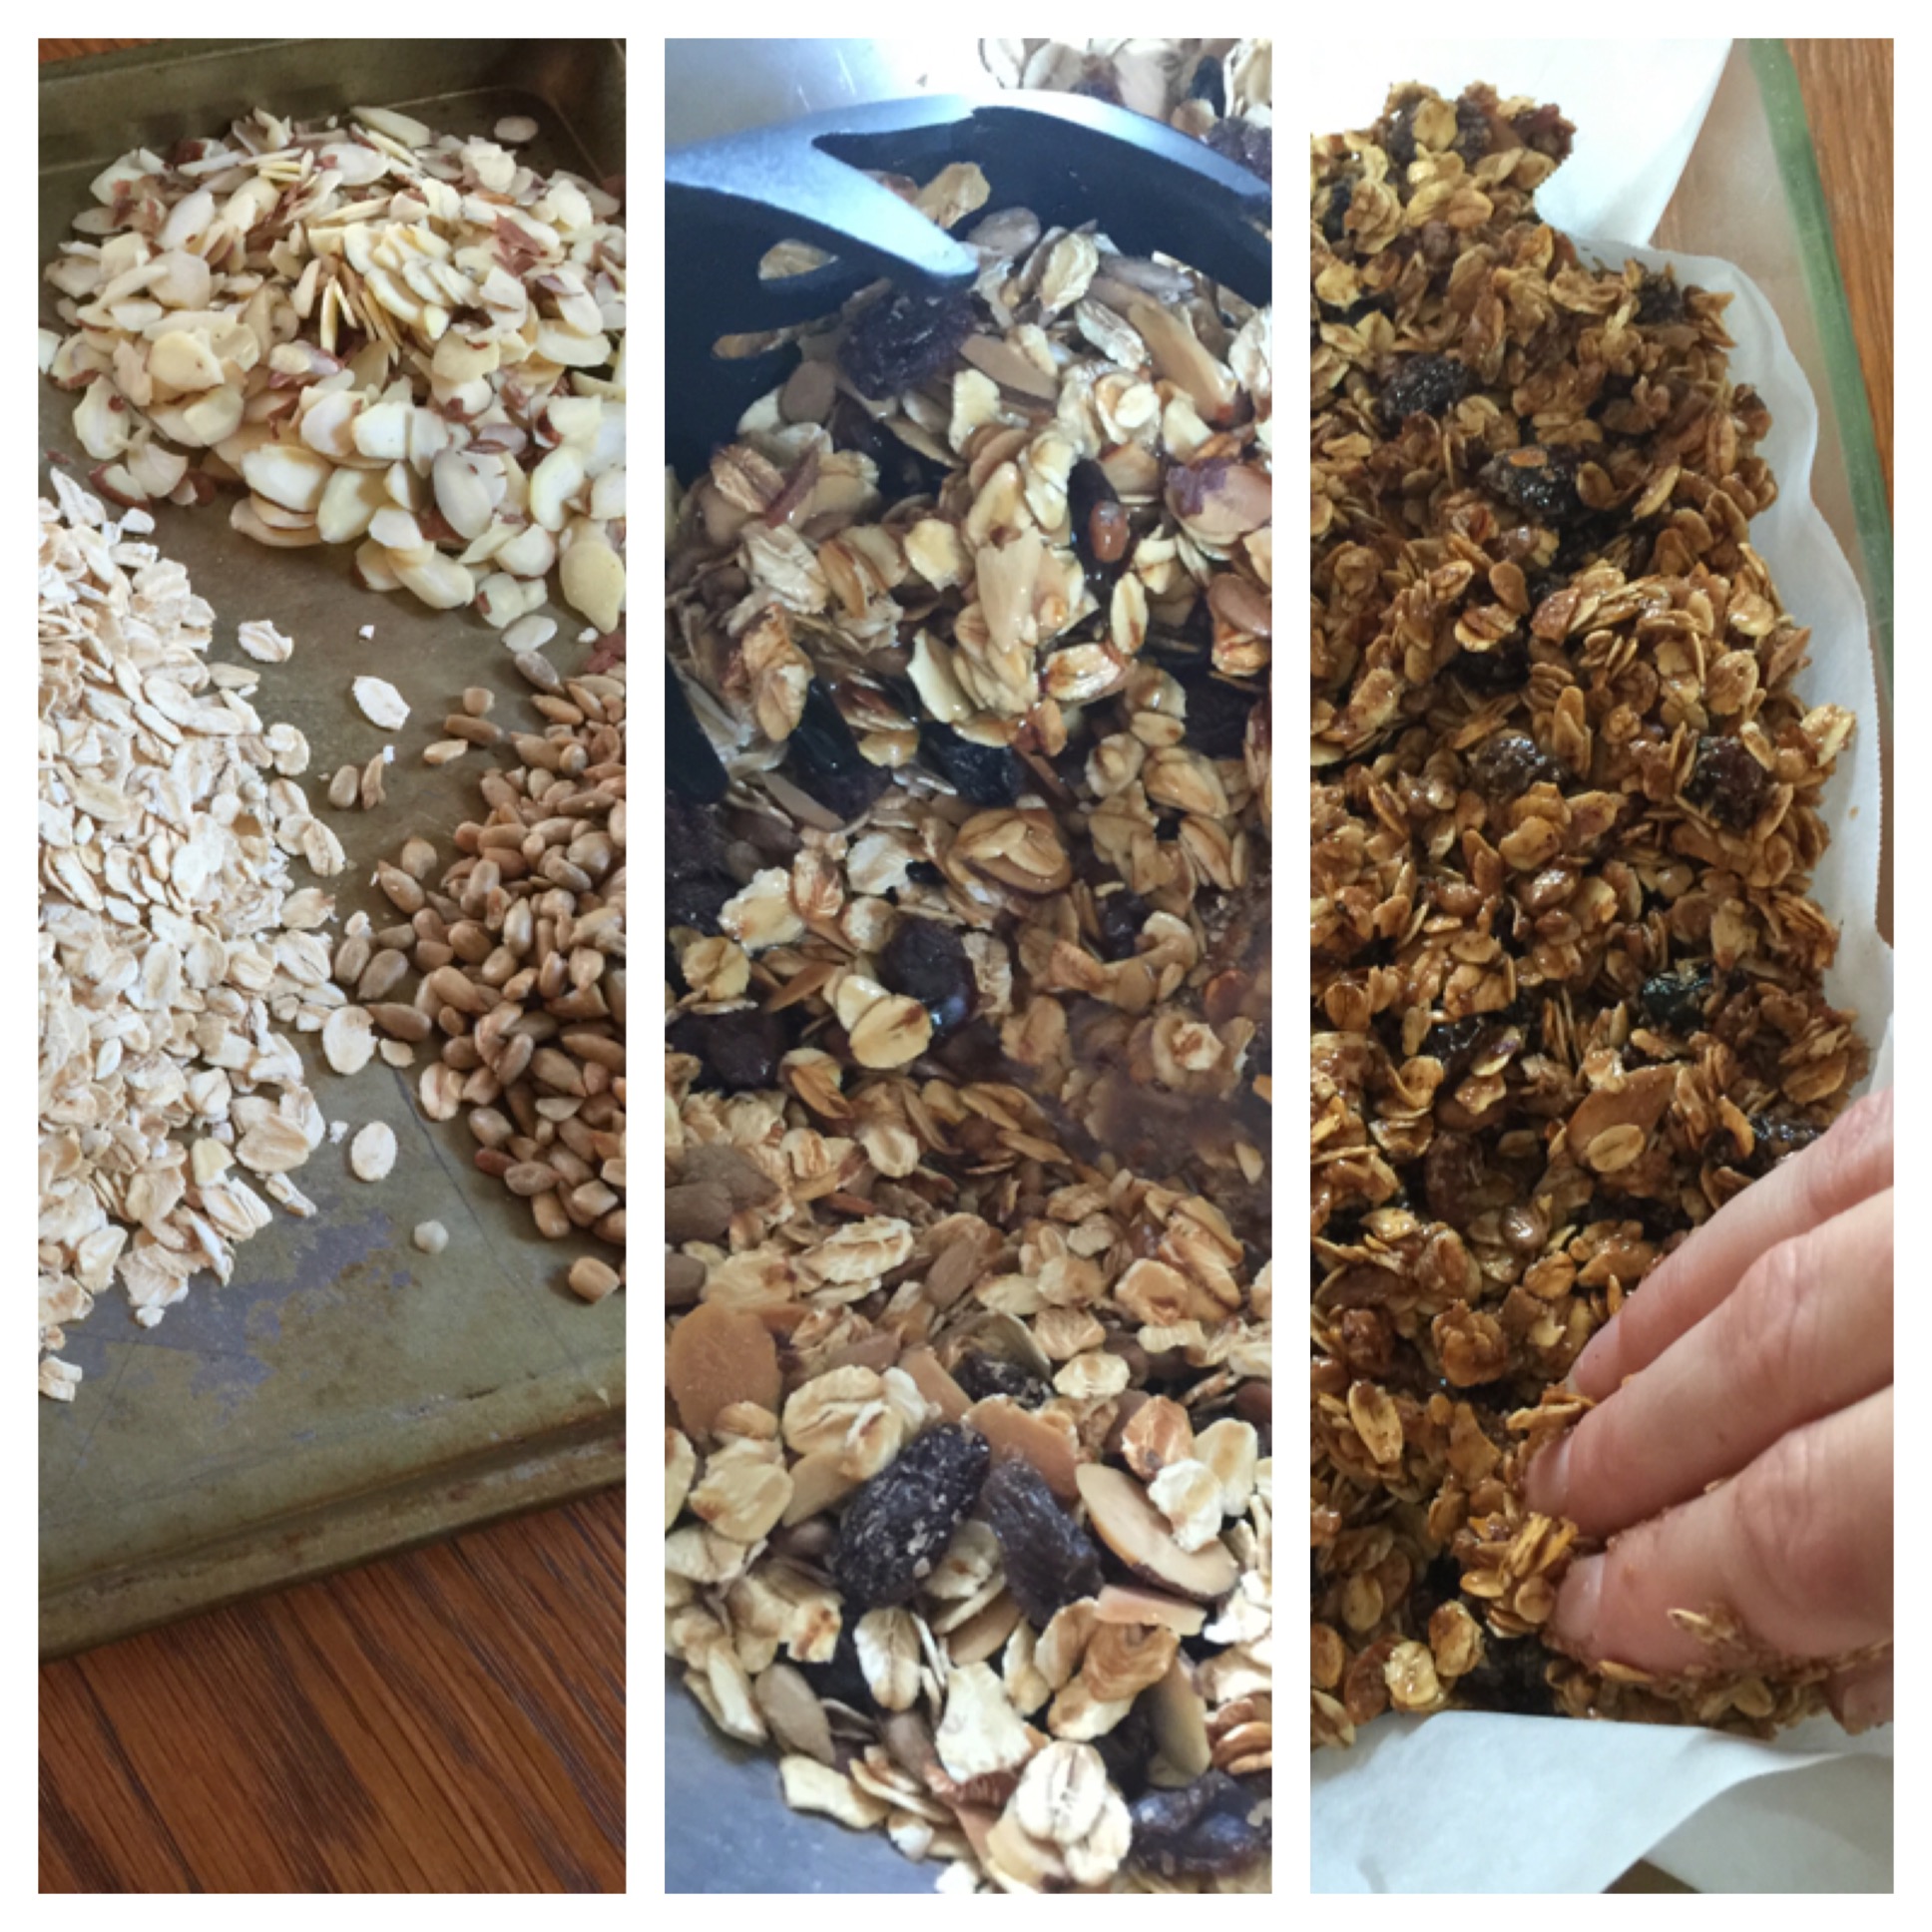 Homemade Diabetic Granola Bars / Simple, Soft and Chewy Granola Bars - These quickly baked granola bars are the perfect portable snack packed with flavor, crunch, and chew, but with no mystery ingredients.